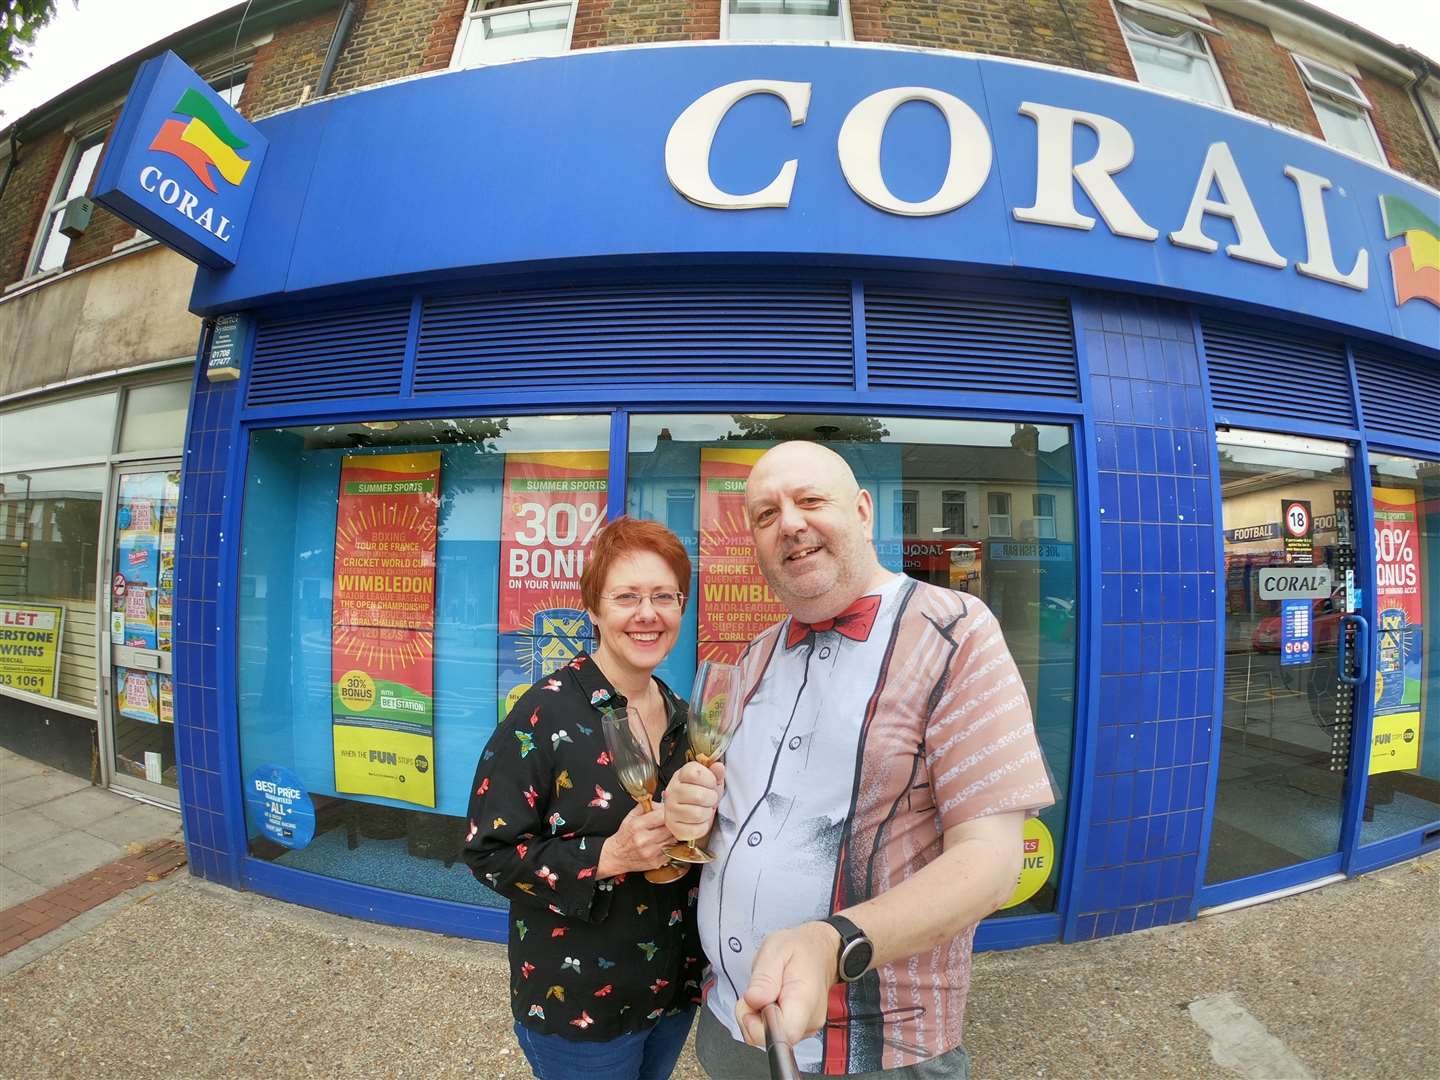 The couple spent celebrated their coral anniversary at a Coral bookies. Picture: South West News Service (16052504)